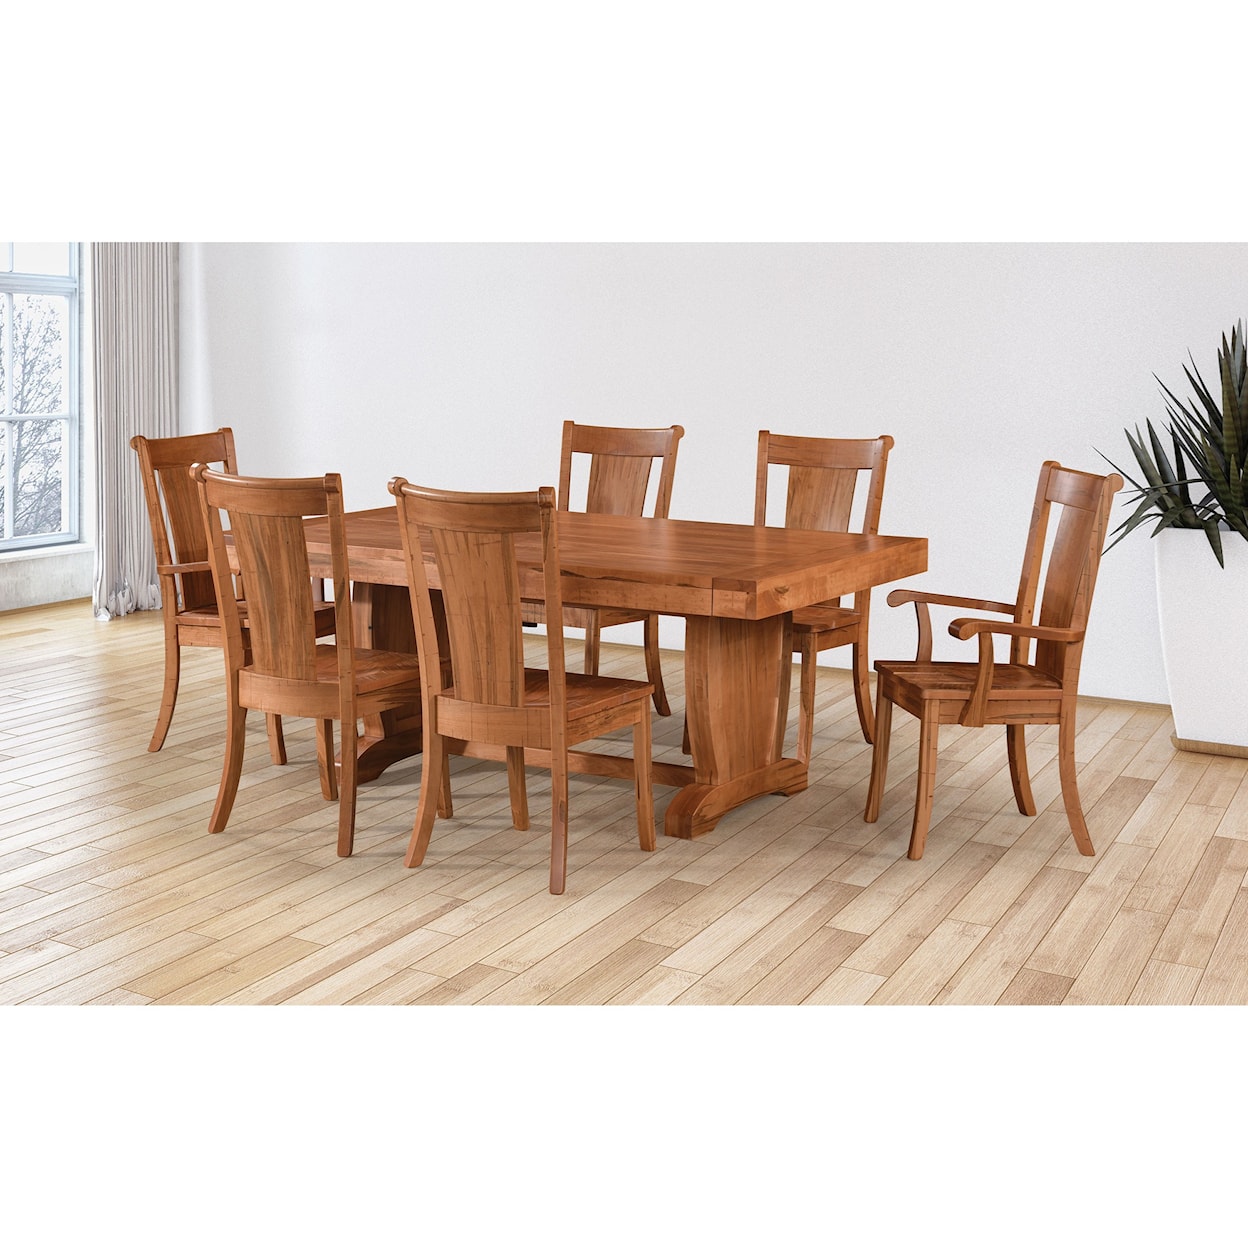 Weaver Woodcraft Williamsburg Customizable Dining Table & Chair Set